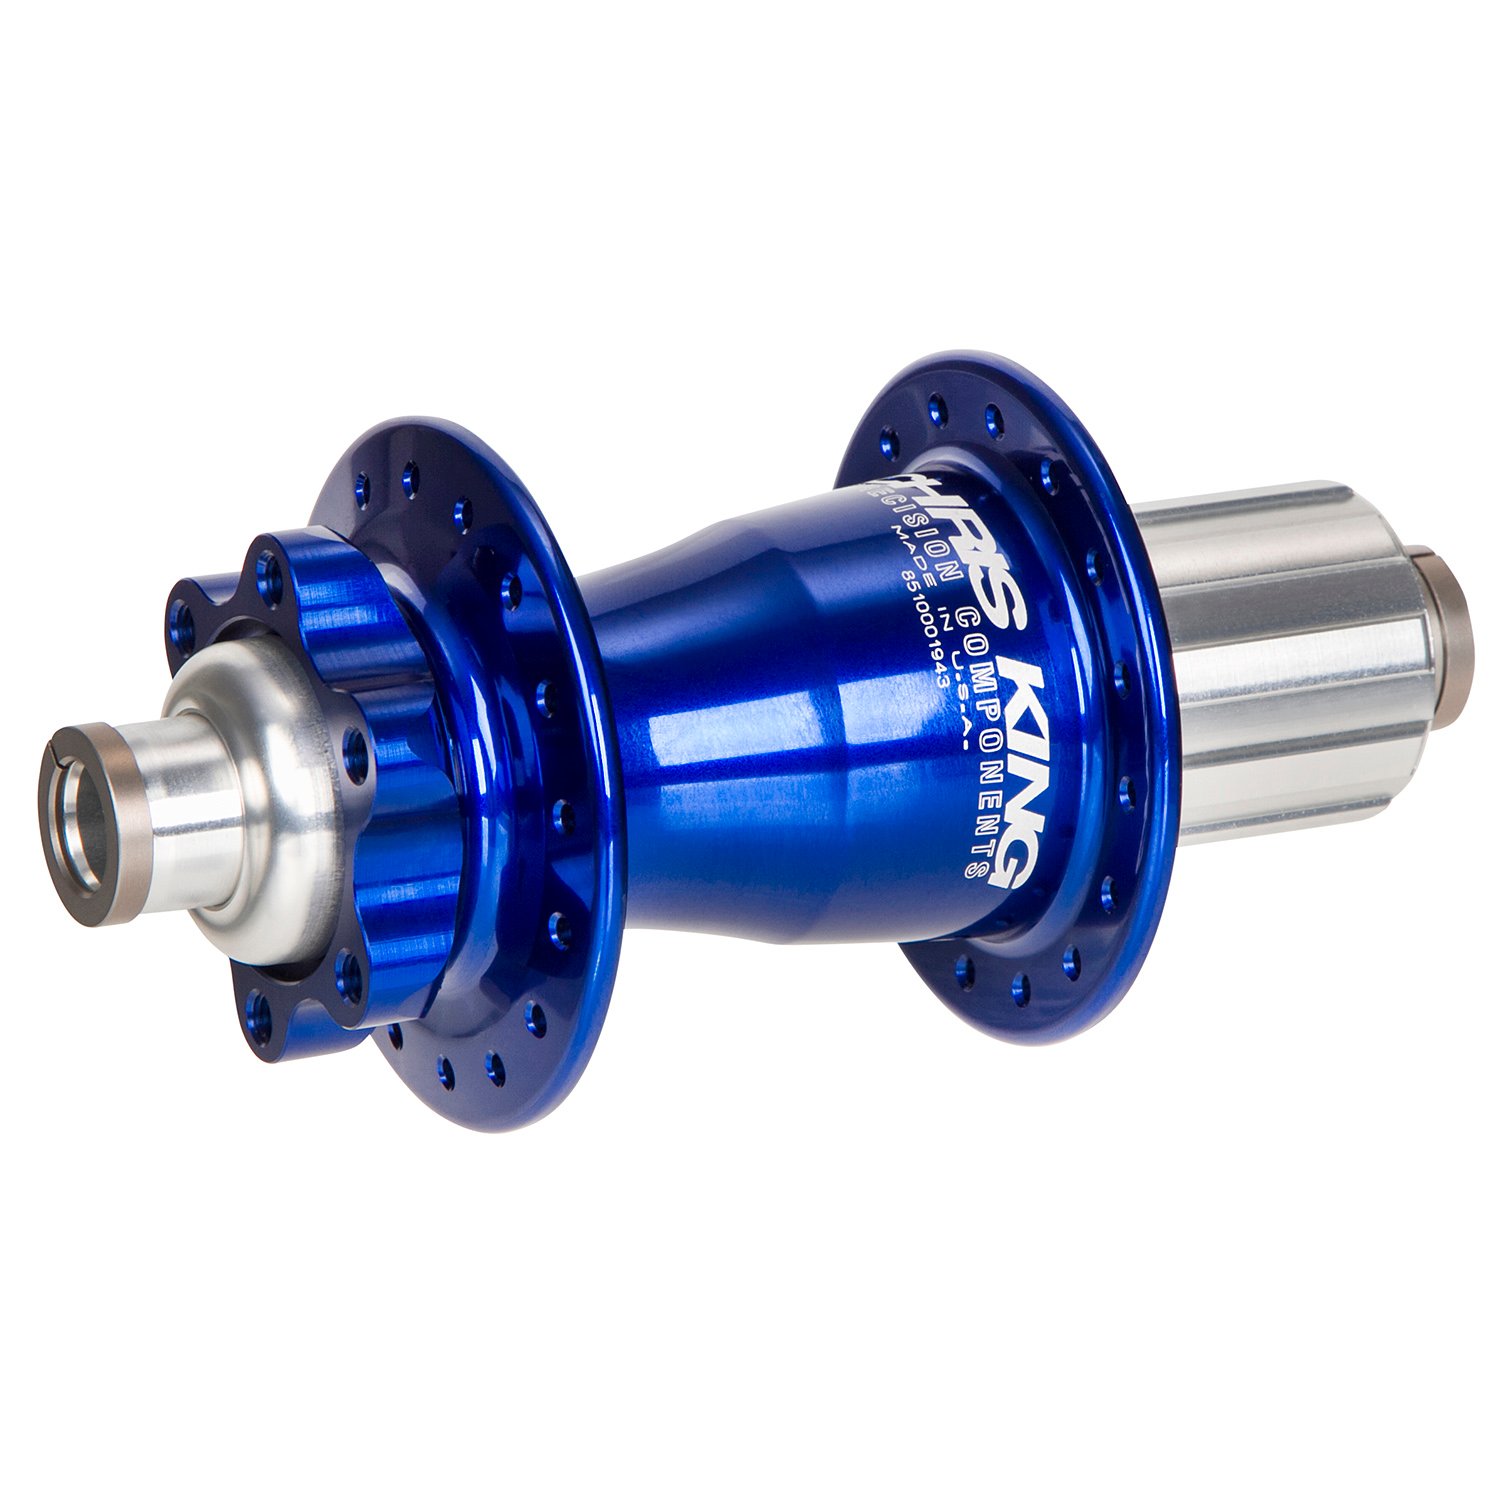 Chris King Mozzo Posteriore MTB ISO - Shimano 148mm x 12mm (Boost), IS 6-Bolt, Navy